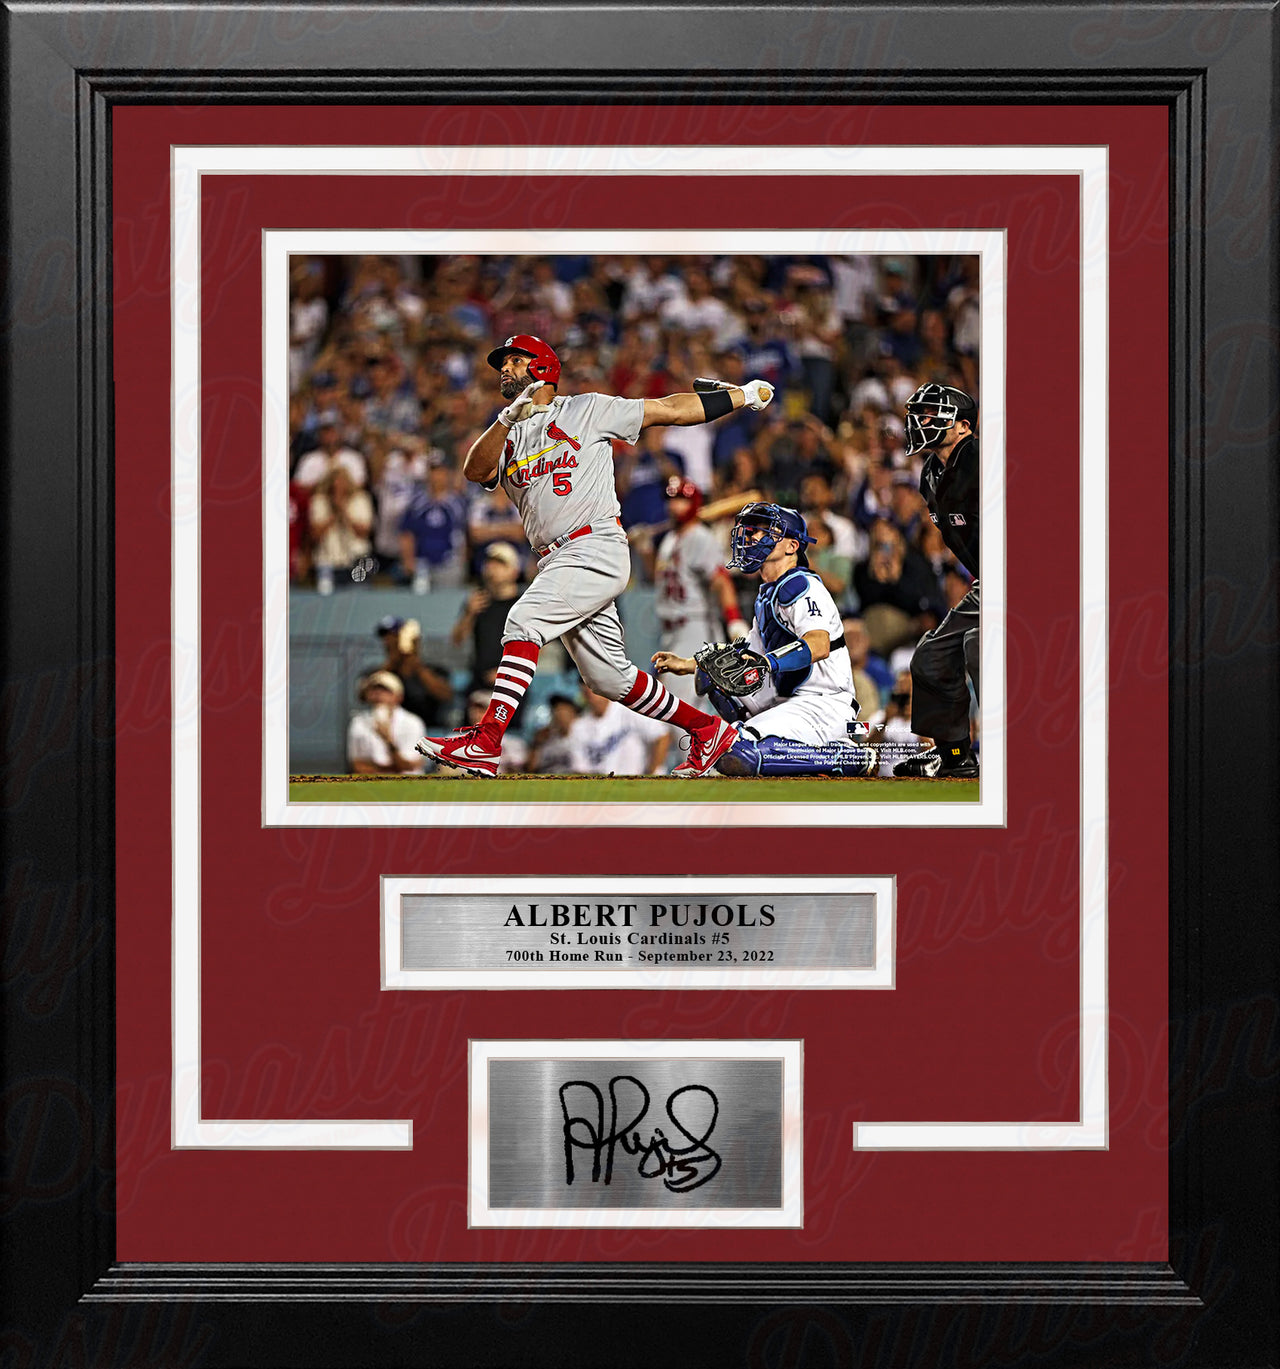 Albert Pujols 700th Home Run St. Louis Cardinals 8" x 10" Framed Baseball Photo with Engraved Autograph - Dynasty Sports & Framing 